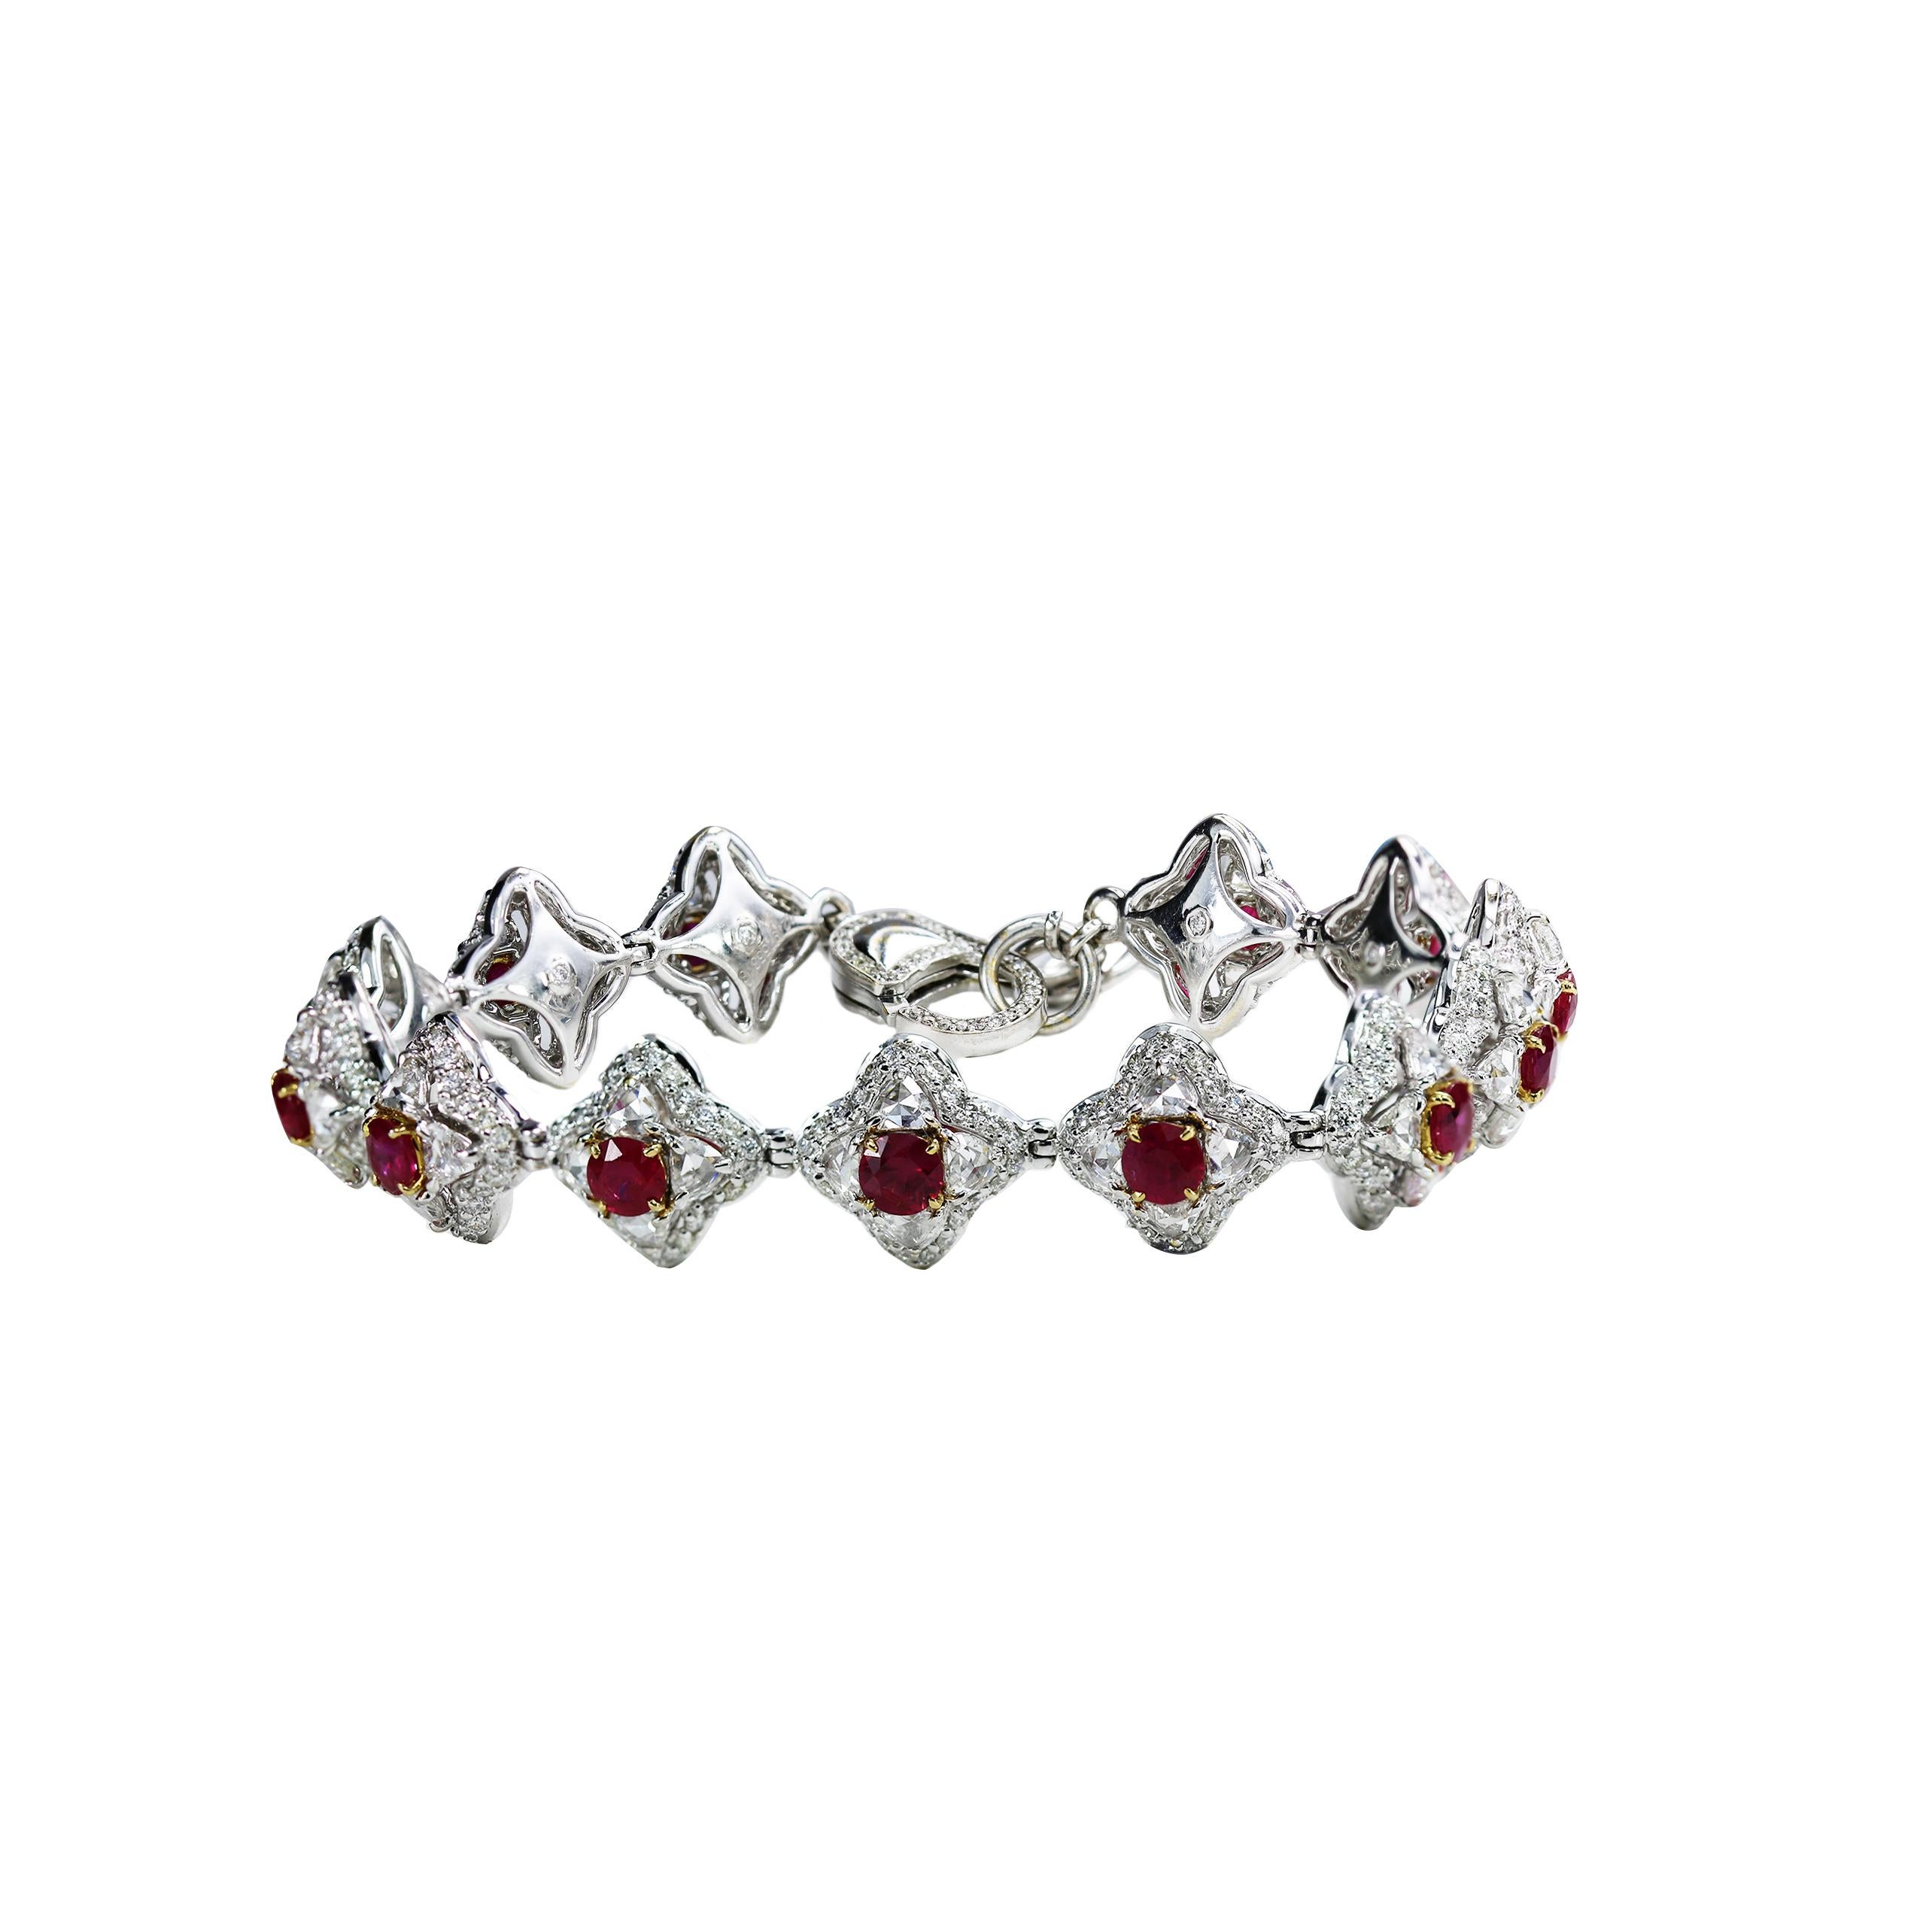 H-I-J/ VS-SI brilliant cut and rosecut diamond and ruby tennis bracelet

We give the classic tennis bracelet a modern update with this dressy piece, ideal for festive soirees. Its 18K white gold base is adorned with H-I-J/ VS-SI brilliant cut and